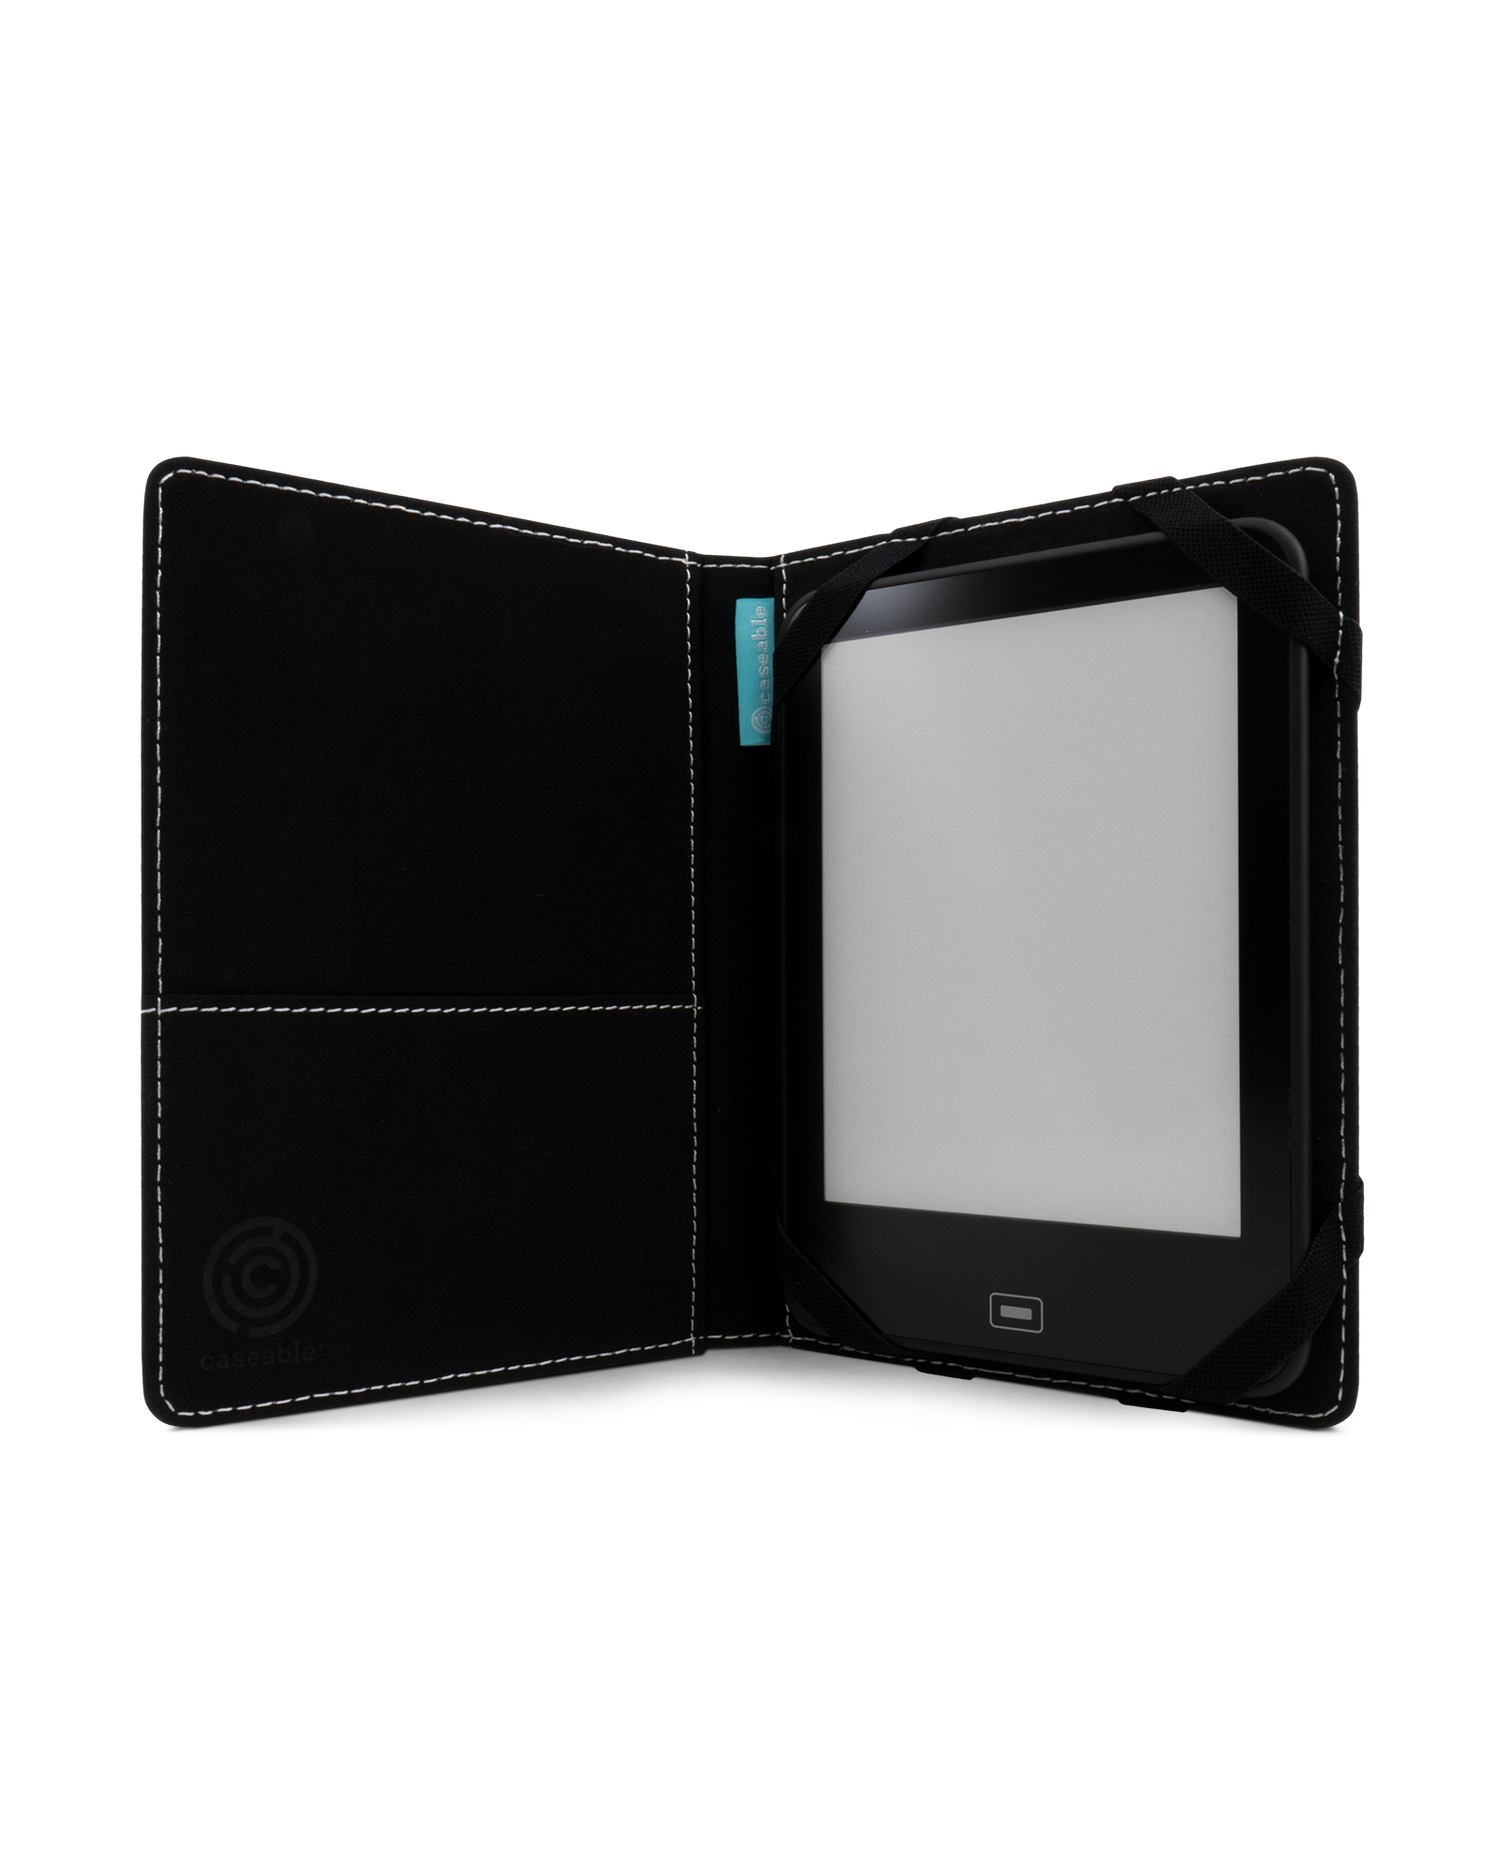 Orchid eReader Case S: Opened interior view